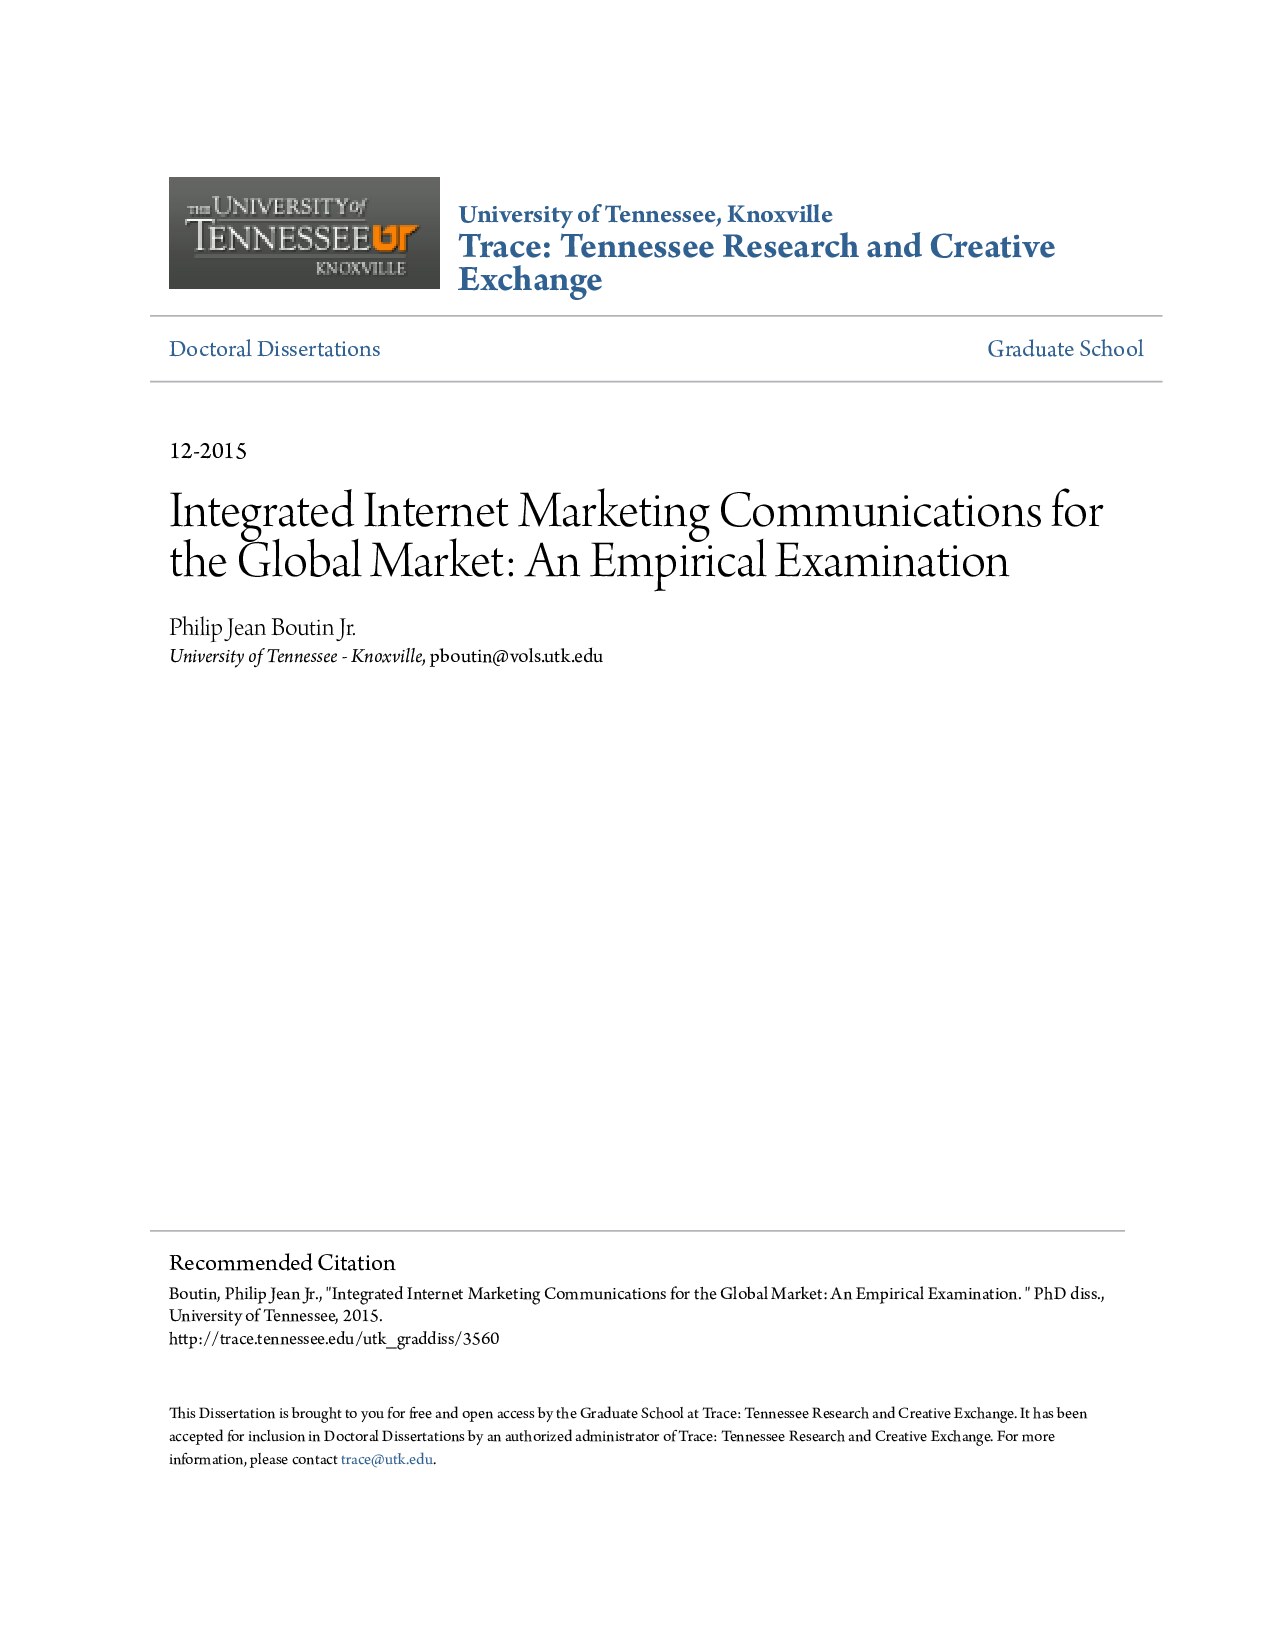 Integrated Internet Marketing Communications for the Global Market: An Empirical Examination